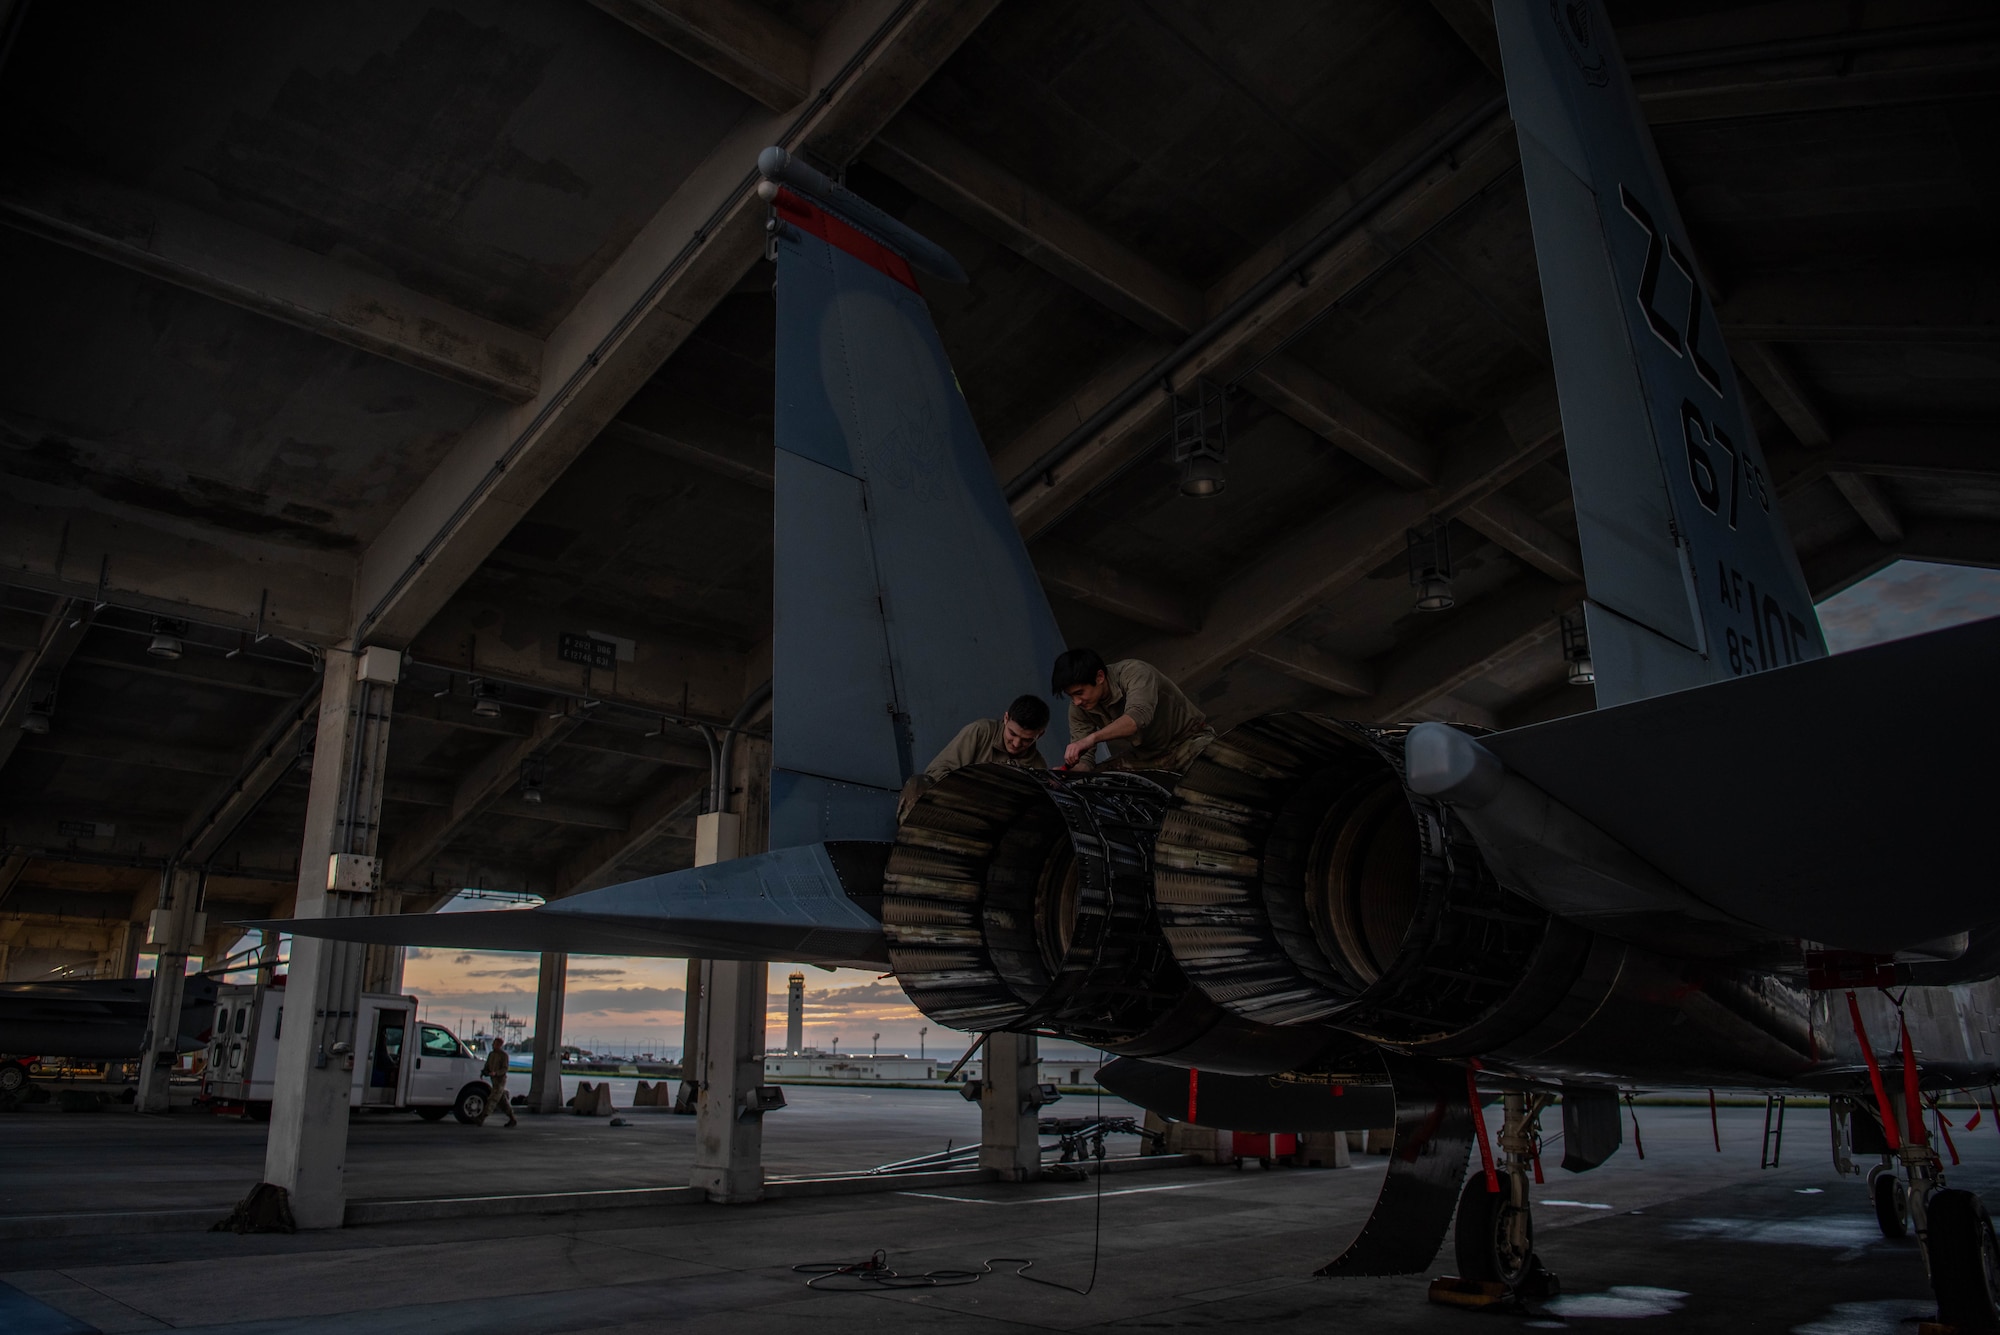 Airmen work on and around F-15C Eagles at sunset.